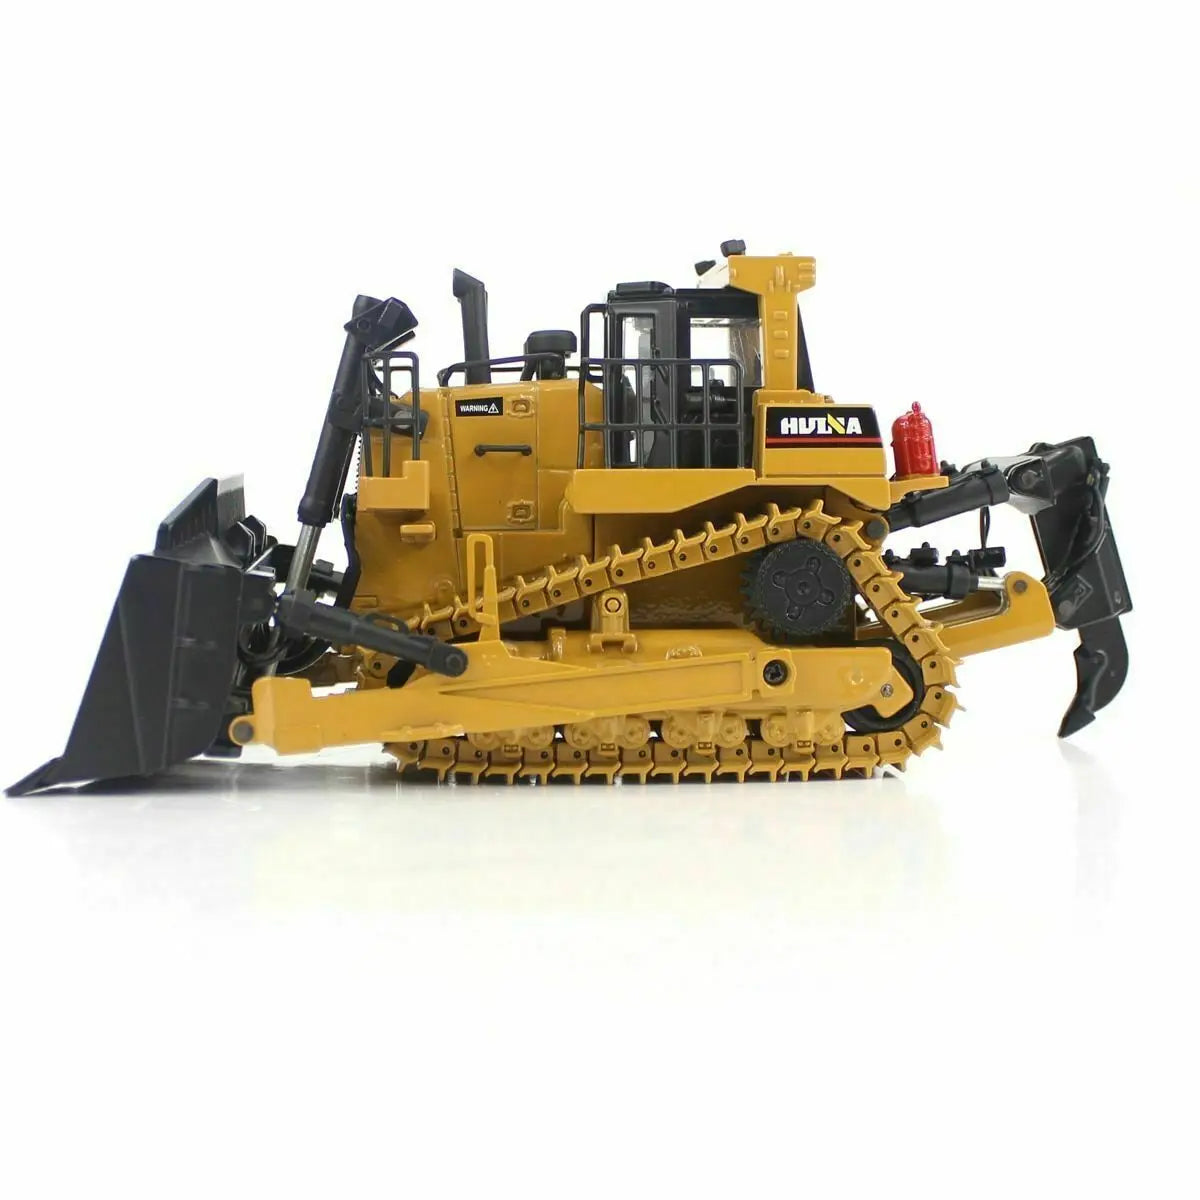 Track-Type Bulldozer 1:50 Scale Metal Tracks Engineering Vehicle Model New in Box